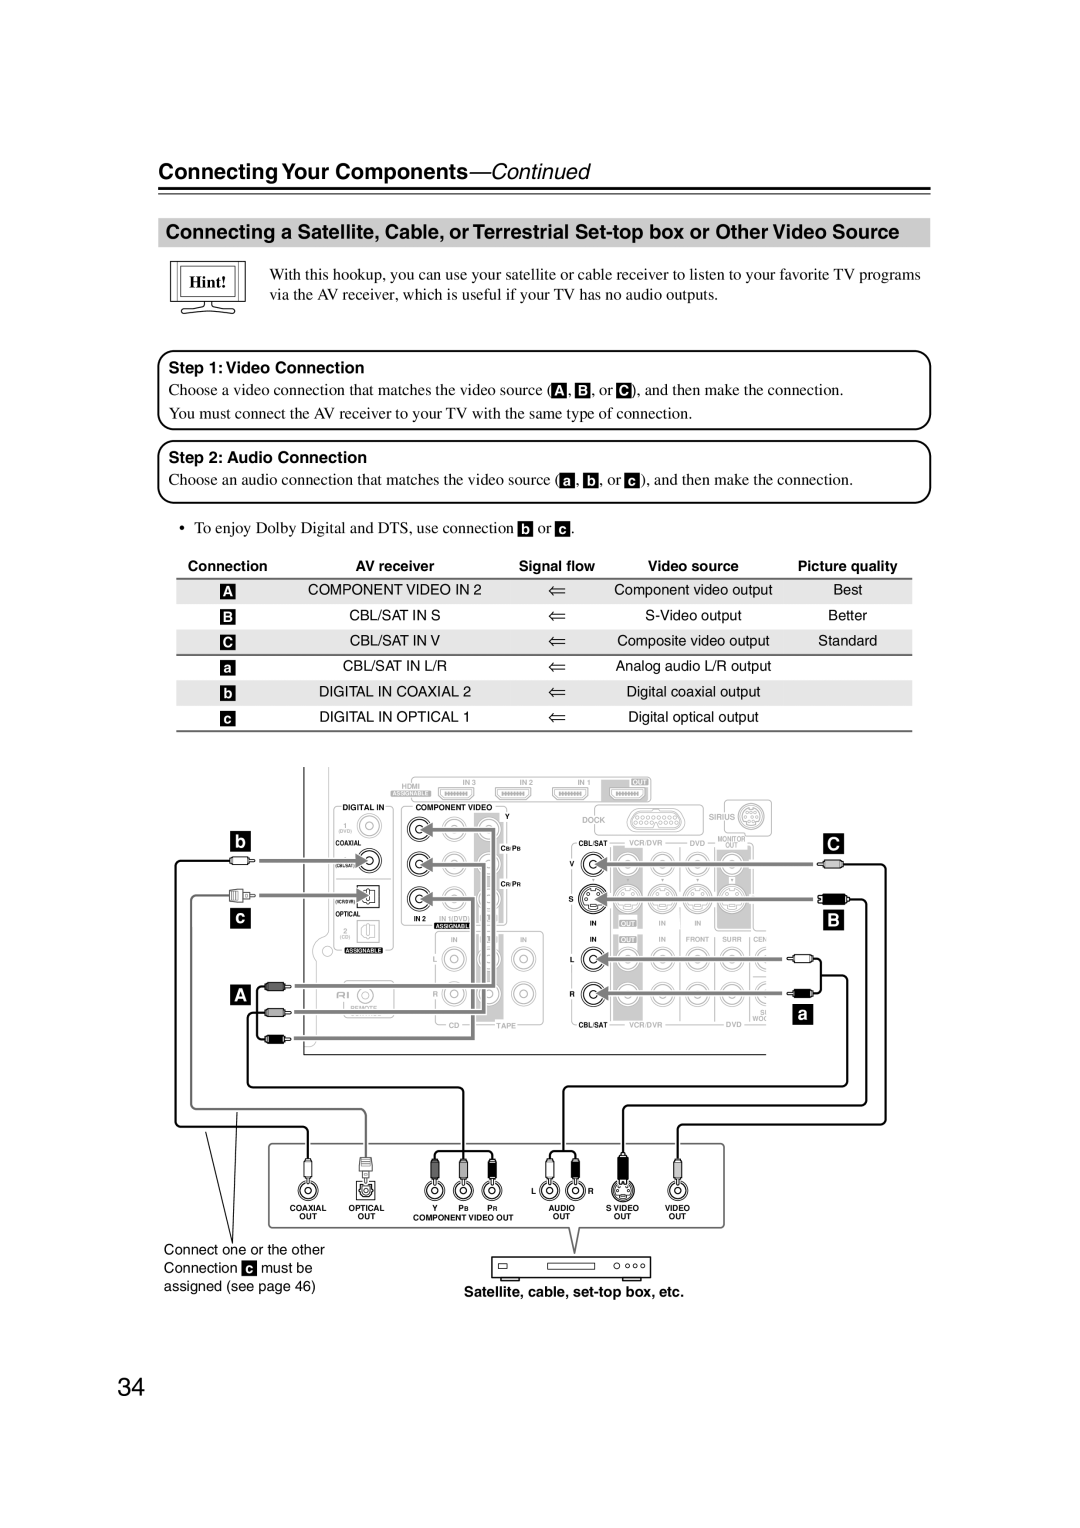 Onkyo HT-S5100 instruction manual Connecting Your Components—Continued, b c A, Hint, Component Video In 